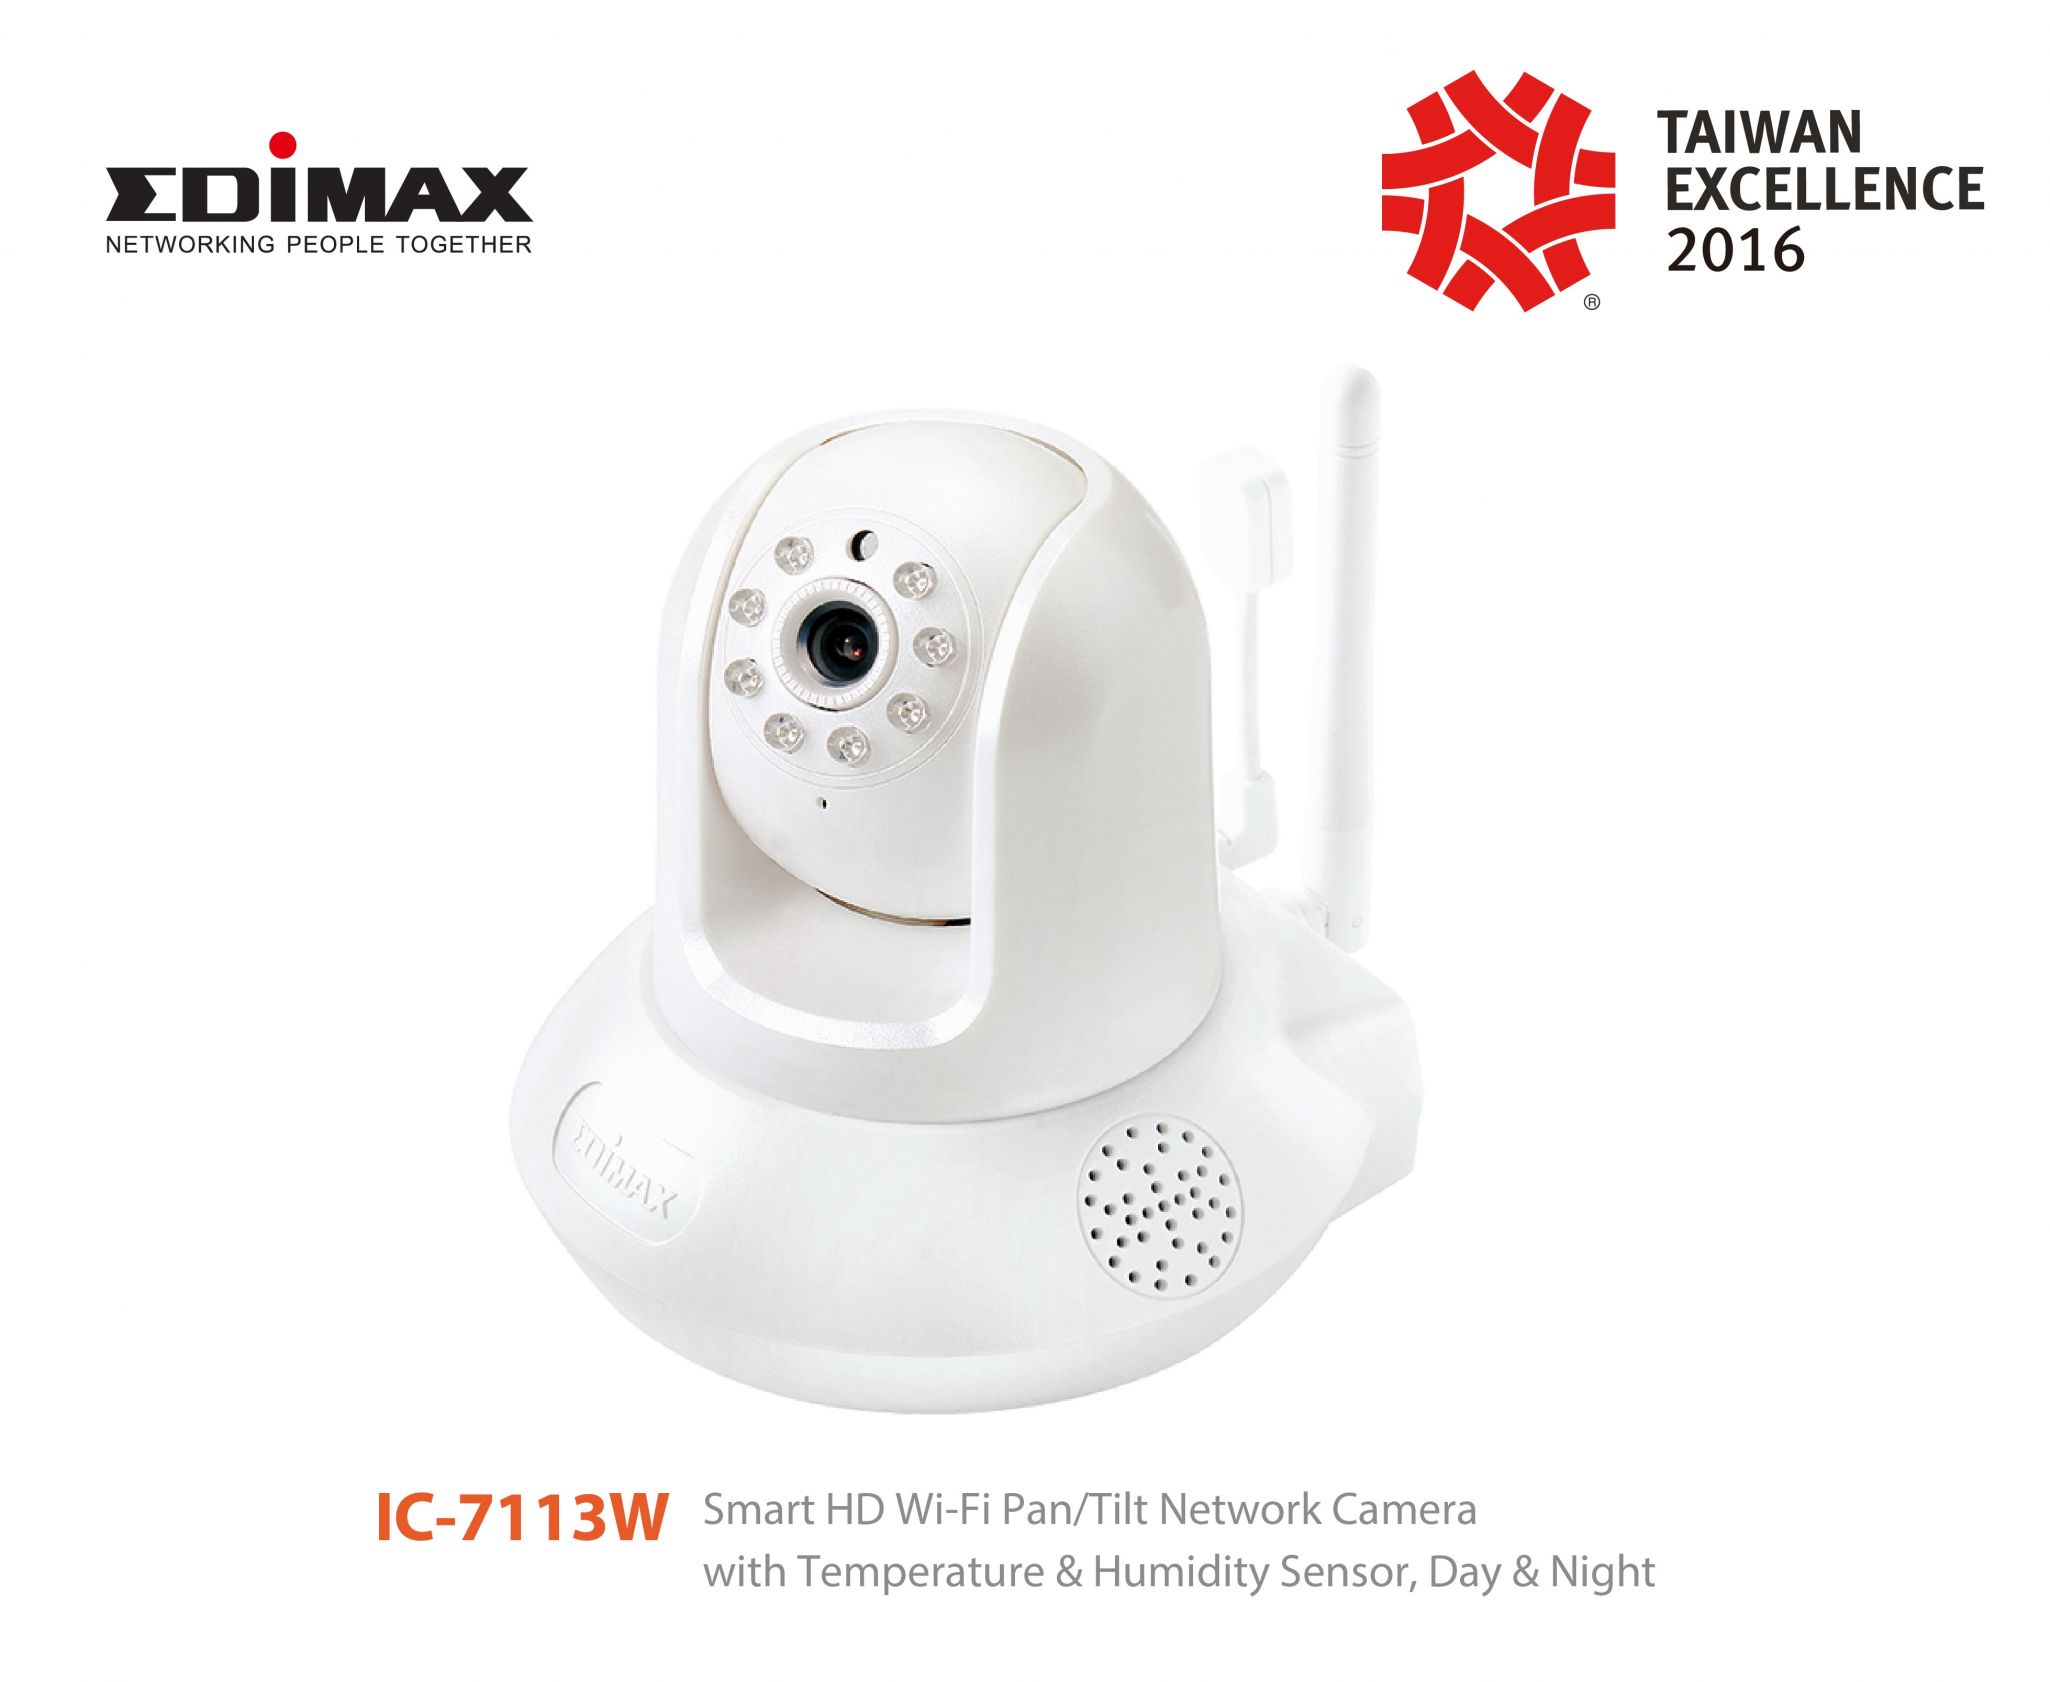 IC-7113W Taiwan Excellence 2016